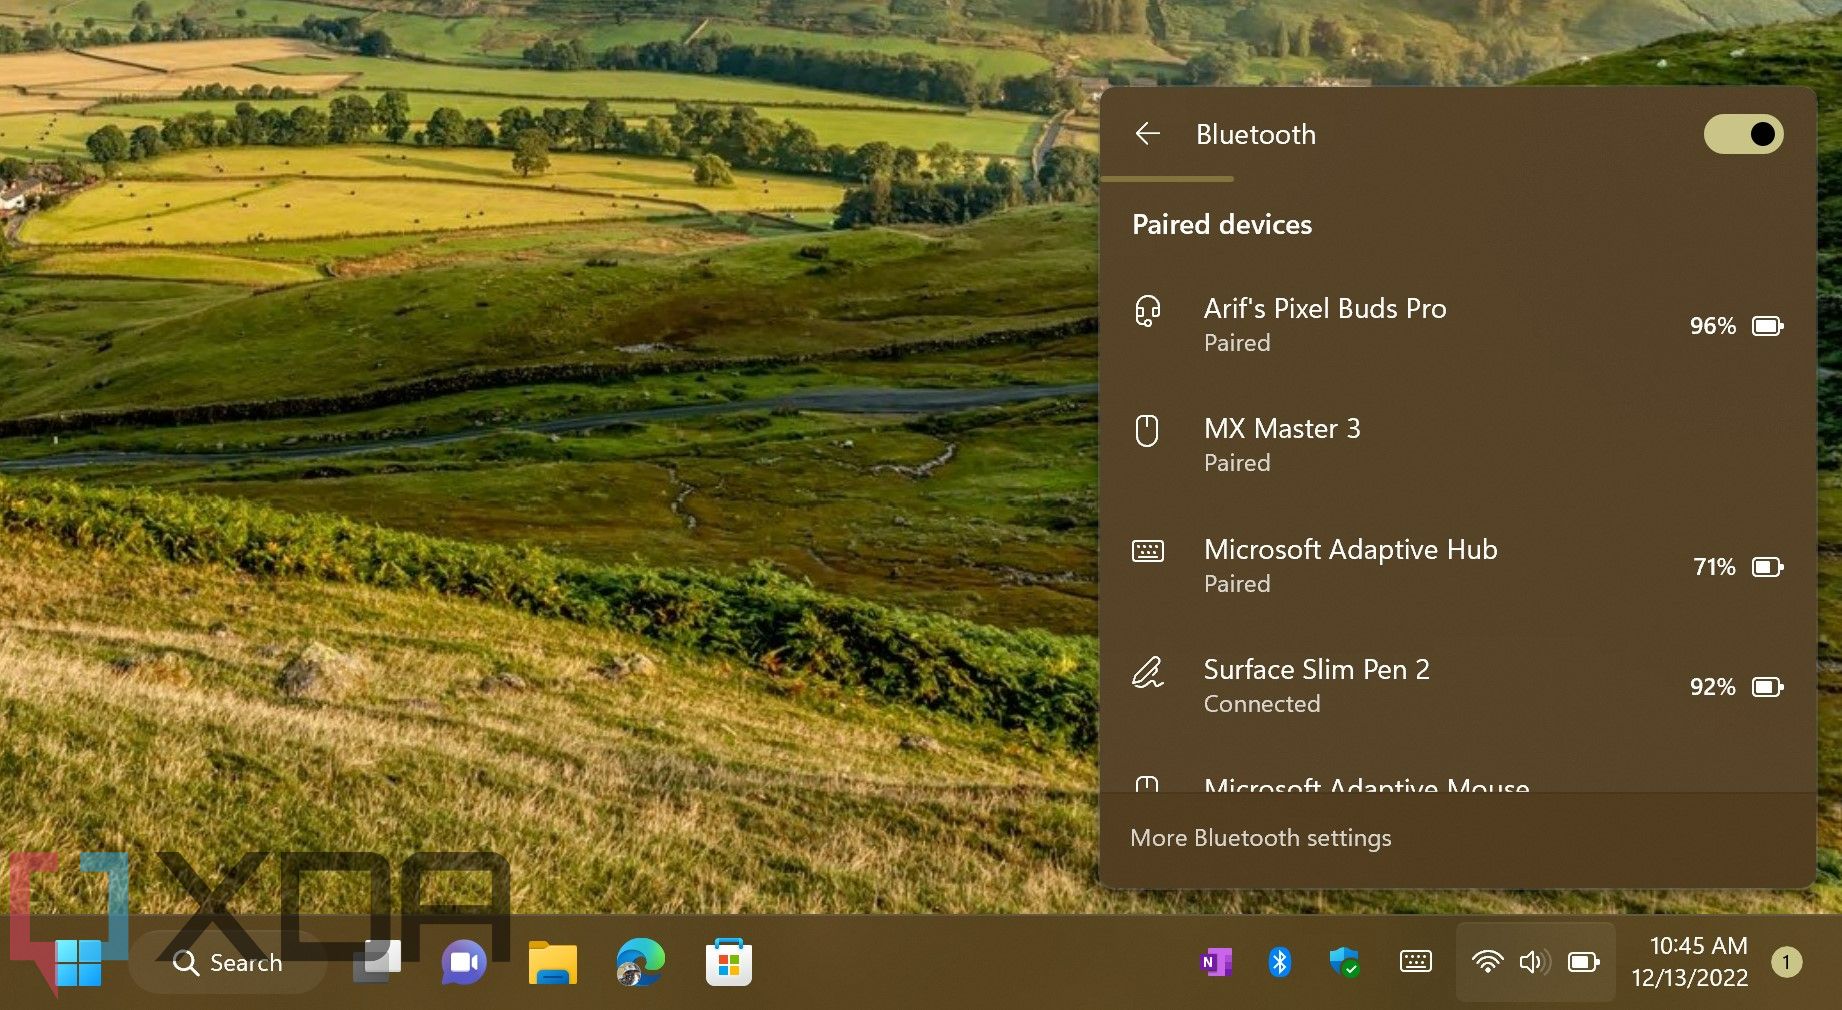 The Quick Settings pop-out menu with Bluetooth devices in Windows 11